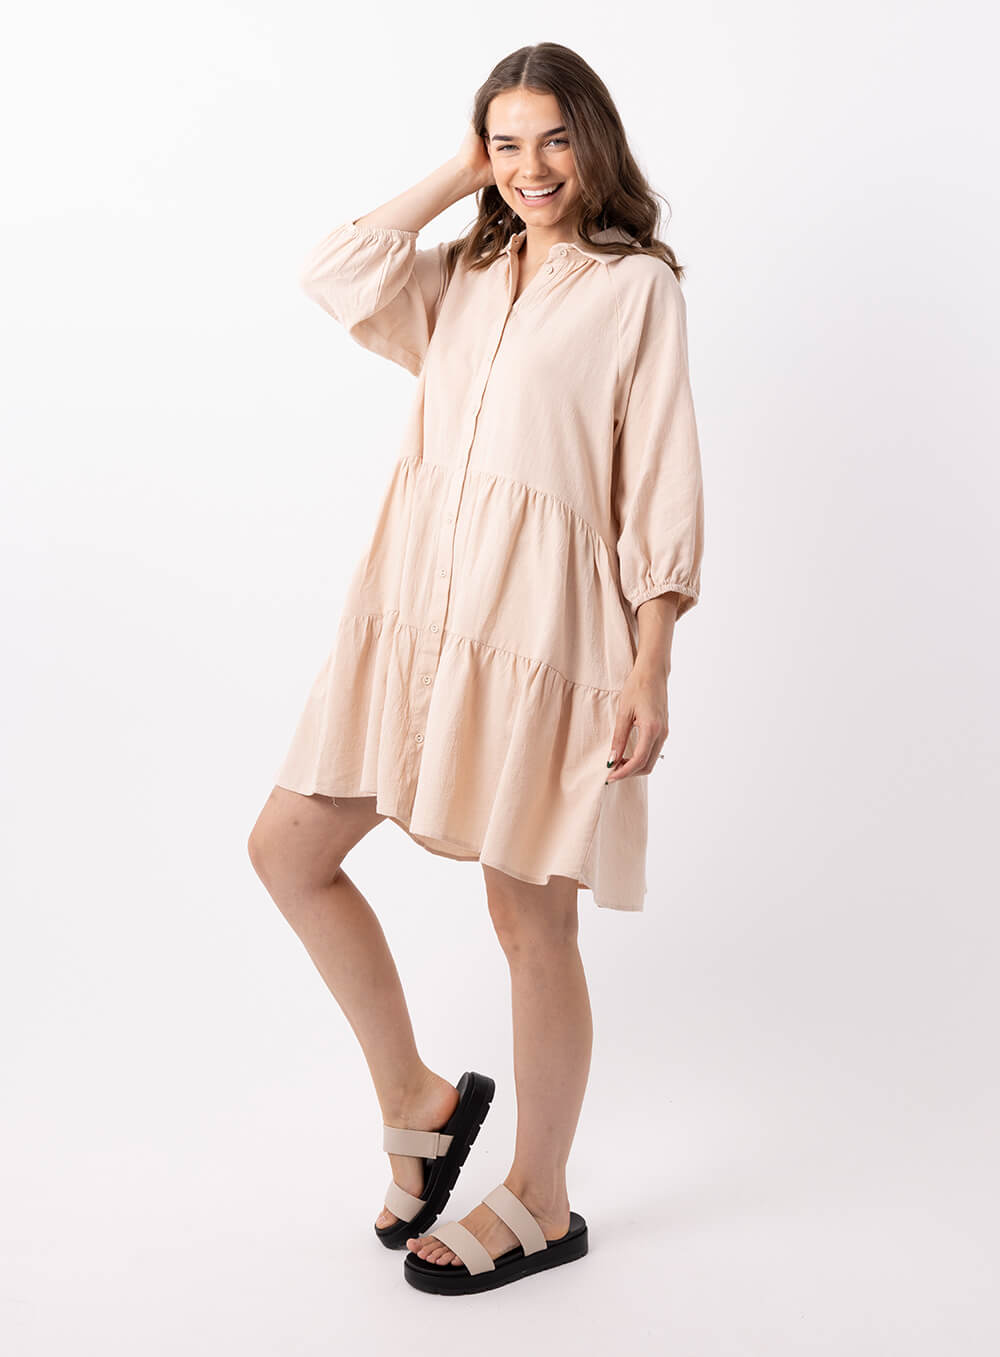 The Jasmine Dress in beige is made of 100% soft cotton, featuring a collar neck, 3/4 sleeve with elastic cuff button through front all the way to the hem, tiered layers through the body, midi in length and 2 side pockets